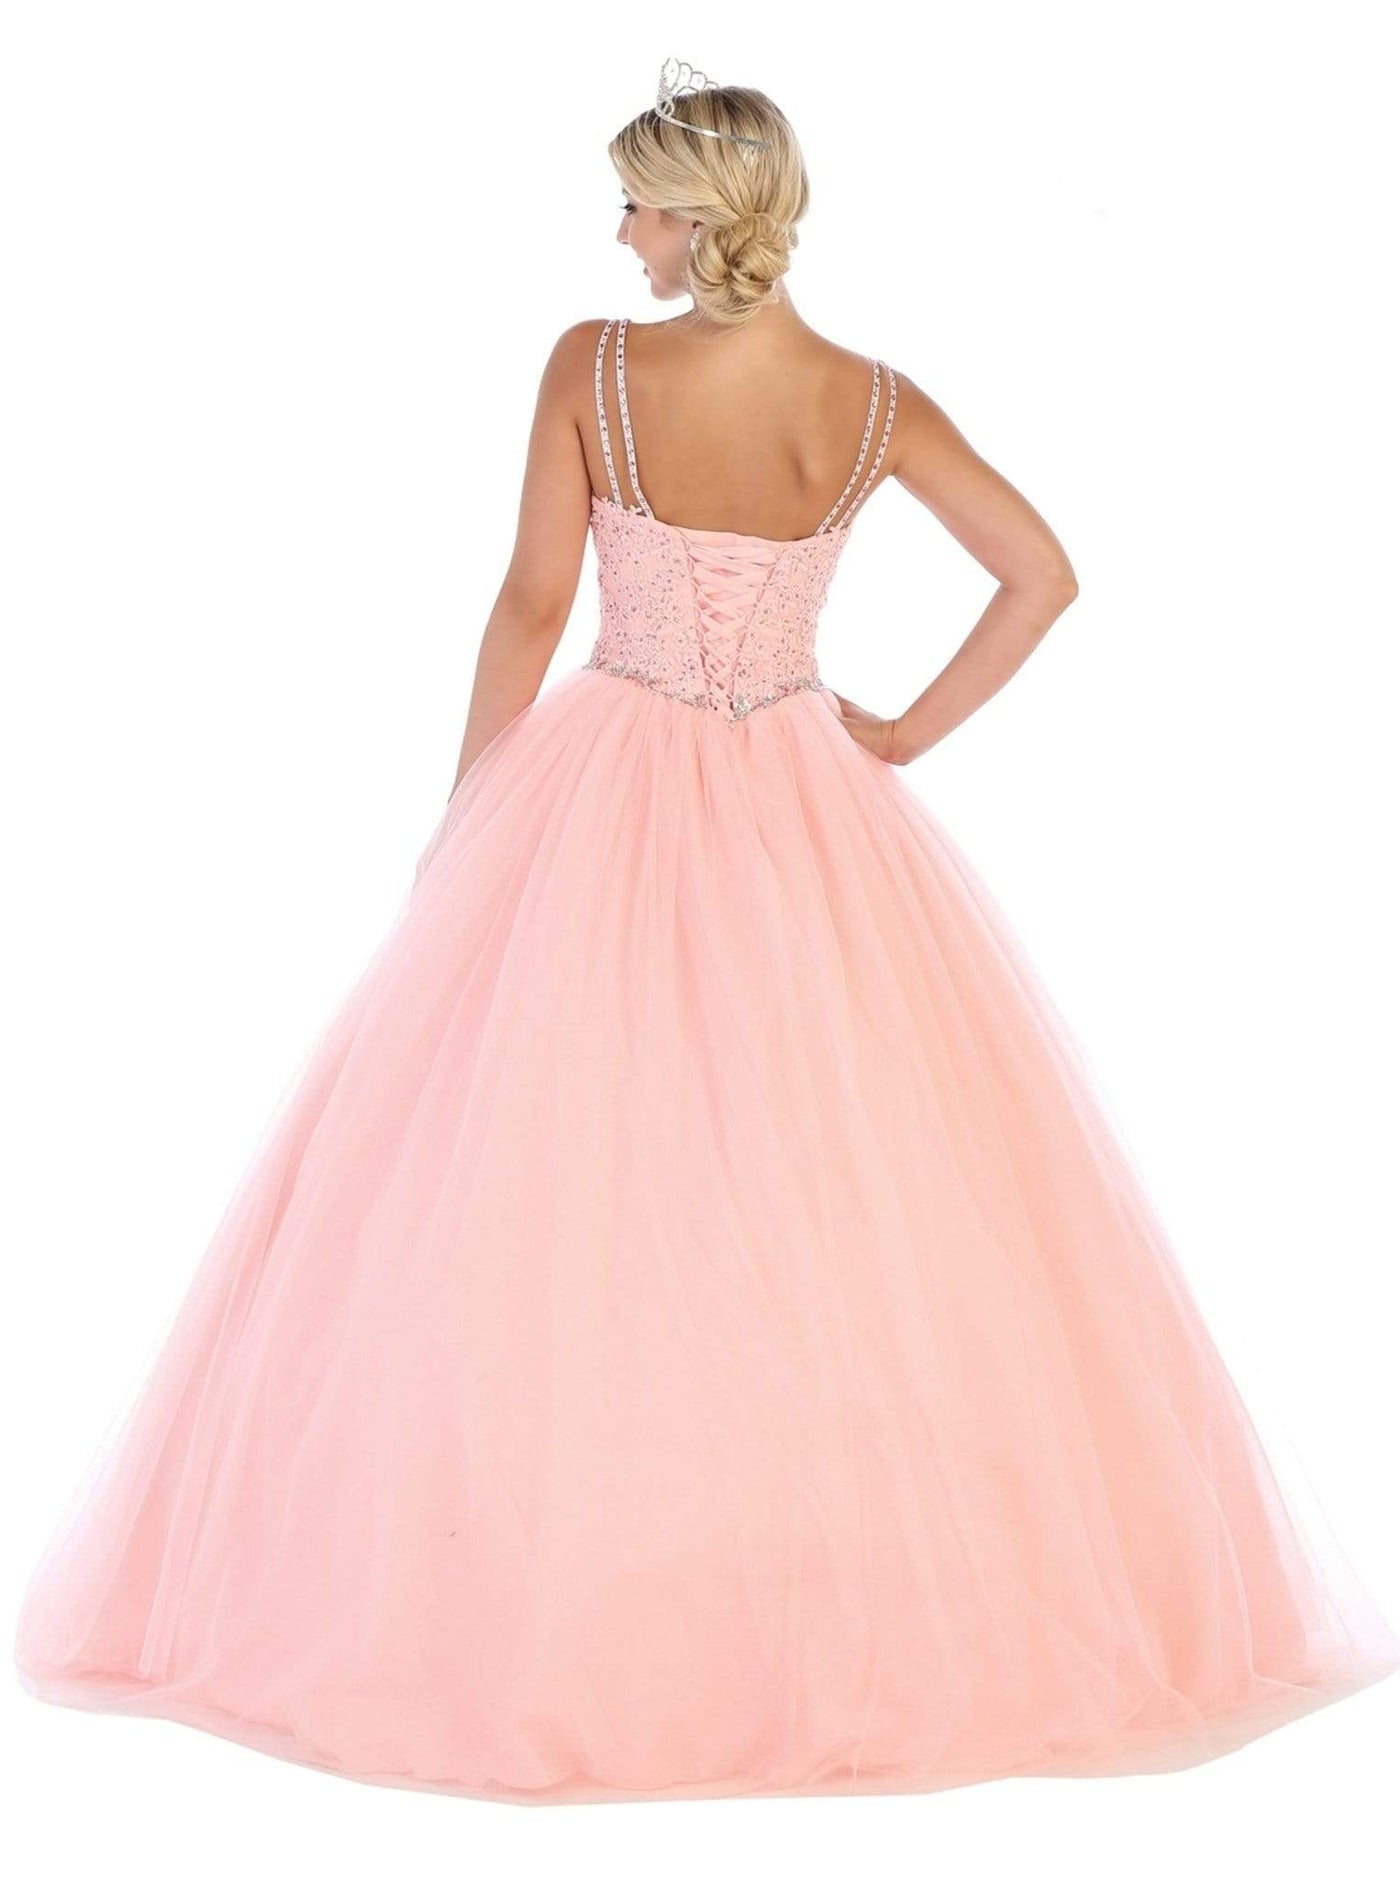 May Queen - LK106 Embroidered V-neck Ballgown Special Occasion Dress